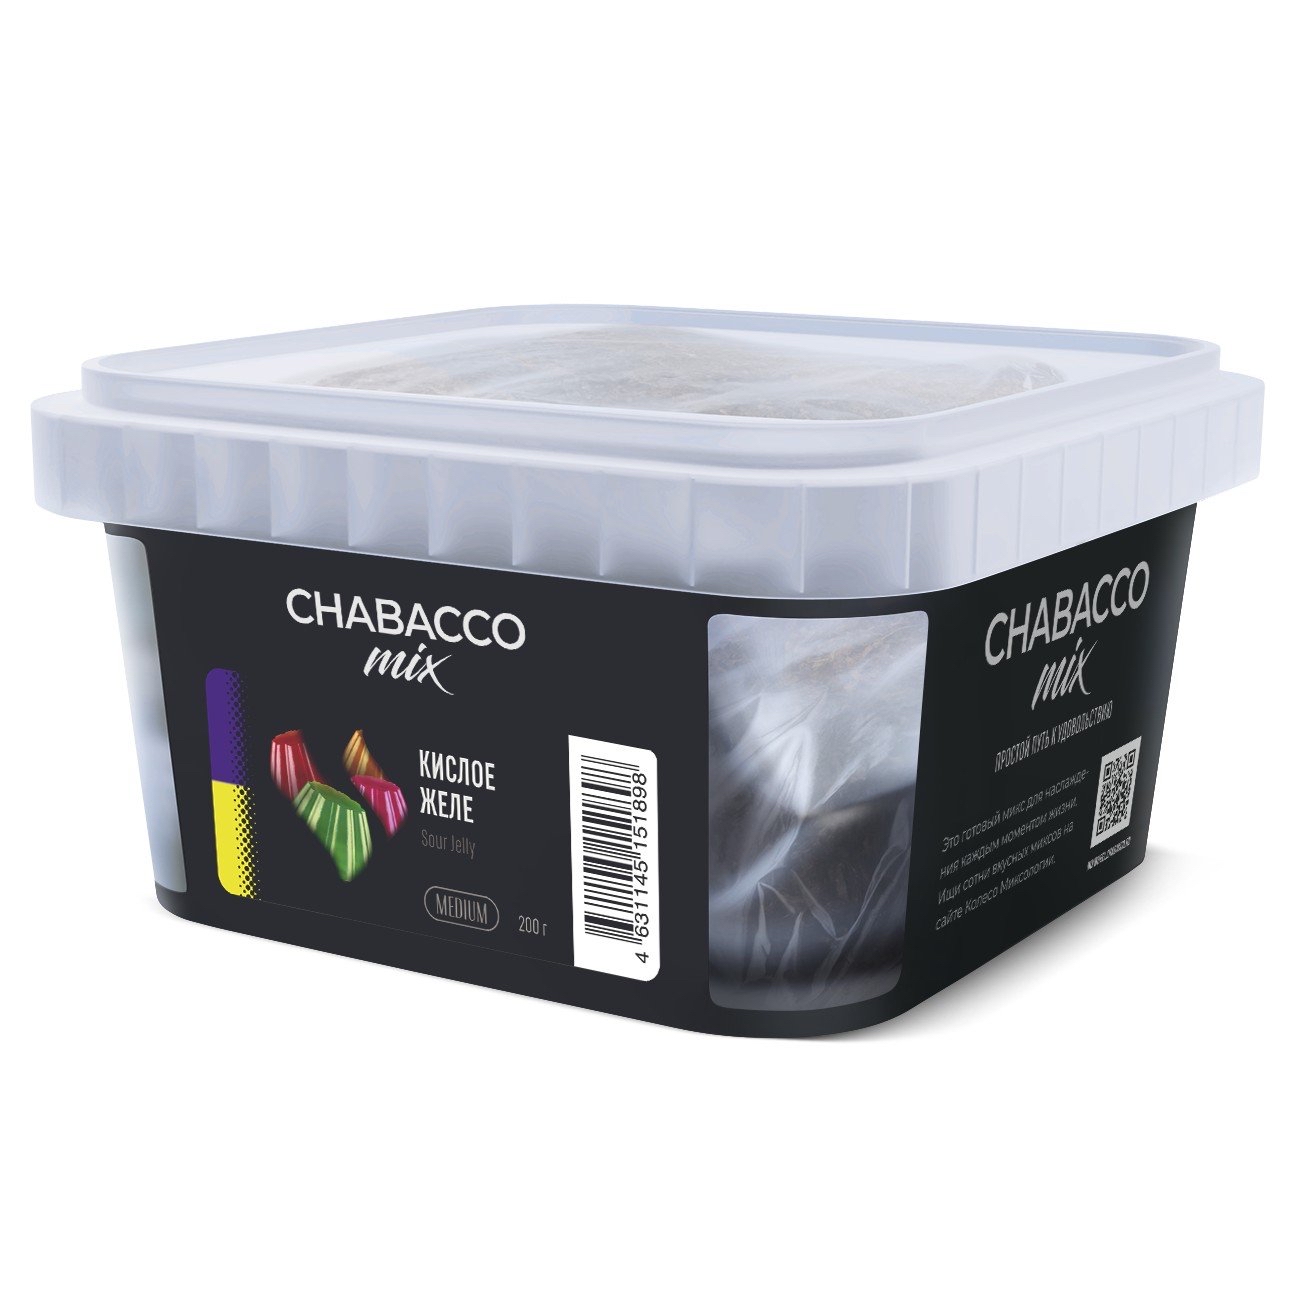 Chabacco - MIX - SOUR JELLY ( кислый мармелад ) - 200 g